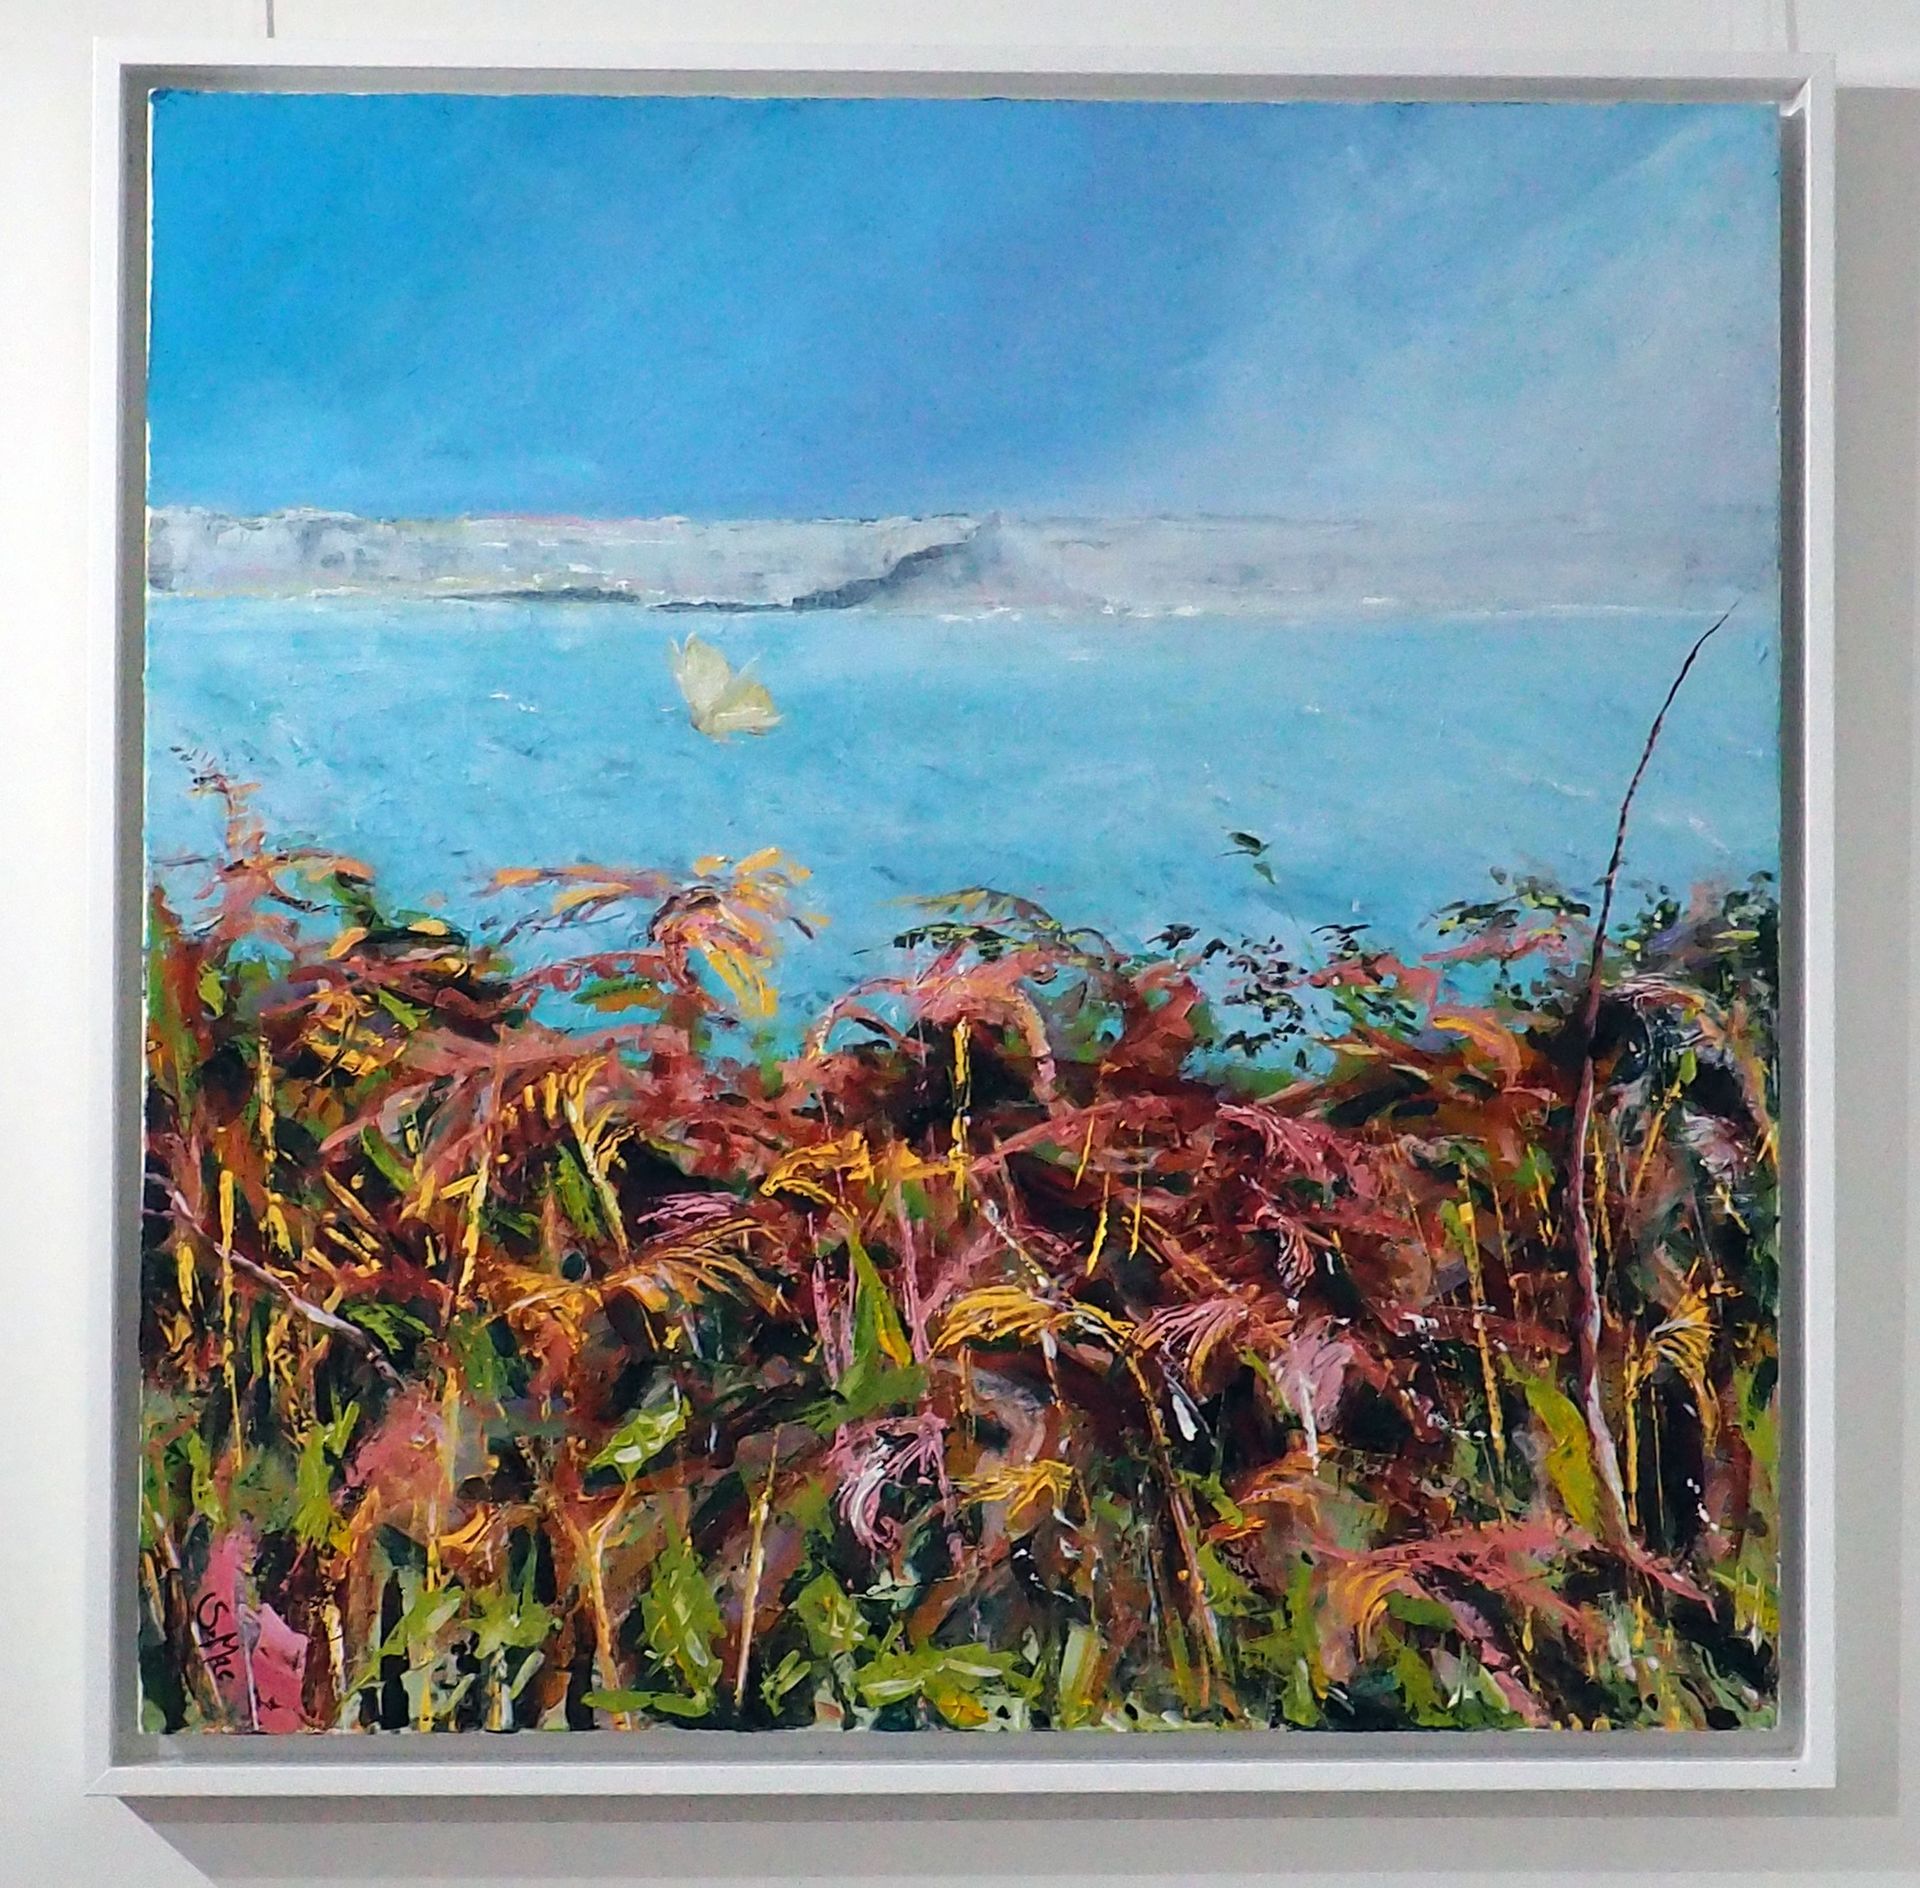 Square painting with orange / green bracken foreground. Above the light aqua sea sits a misty St Michael's Mount. Above is bright blue sky with light coming in from the top right corner. There is a Cabbage White Butterfly flying close above the bracken. Simply framed in white wood. 